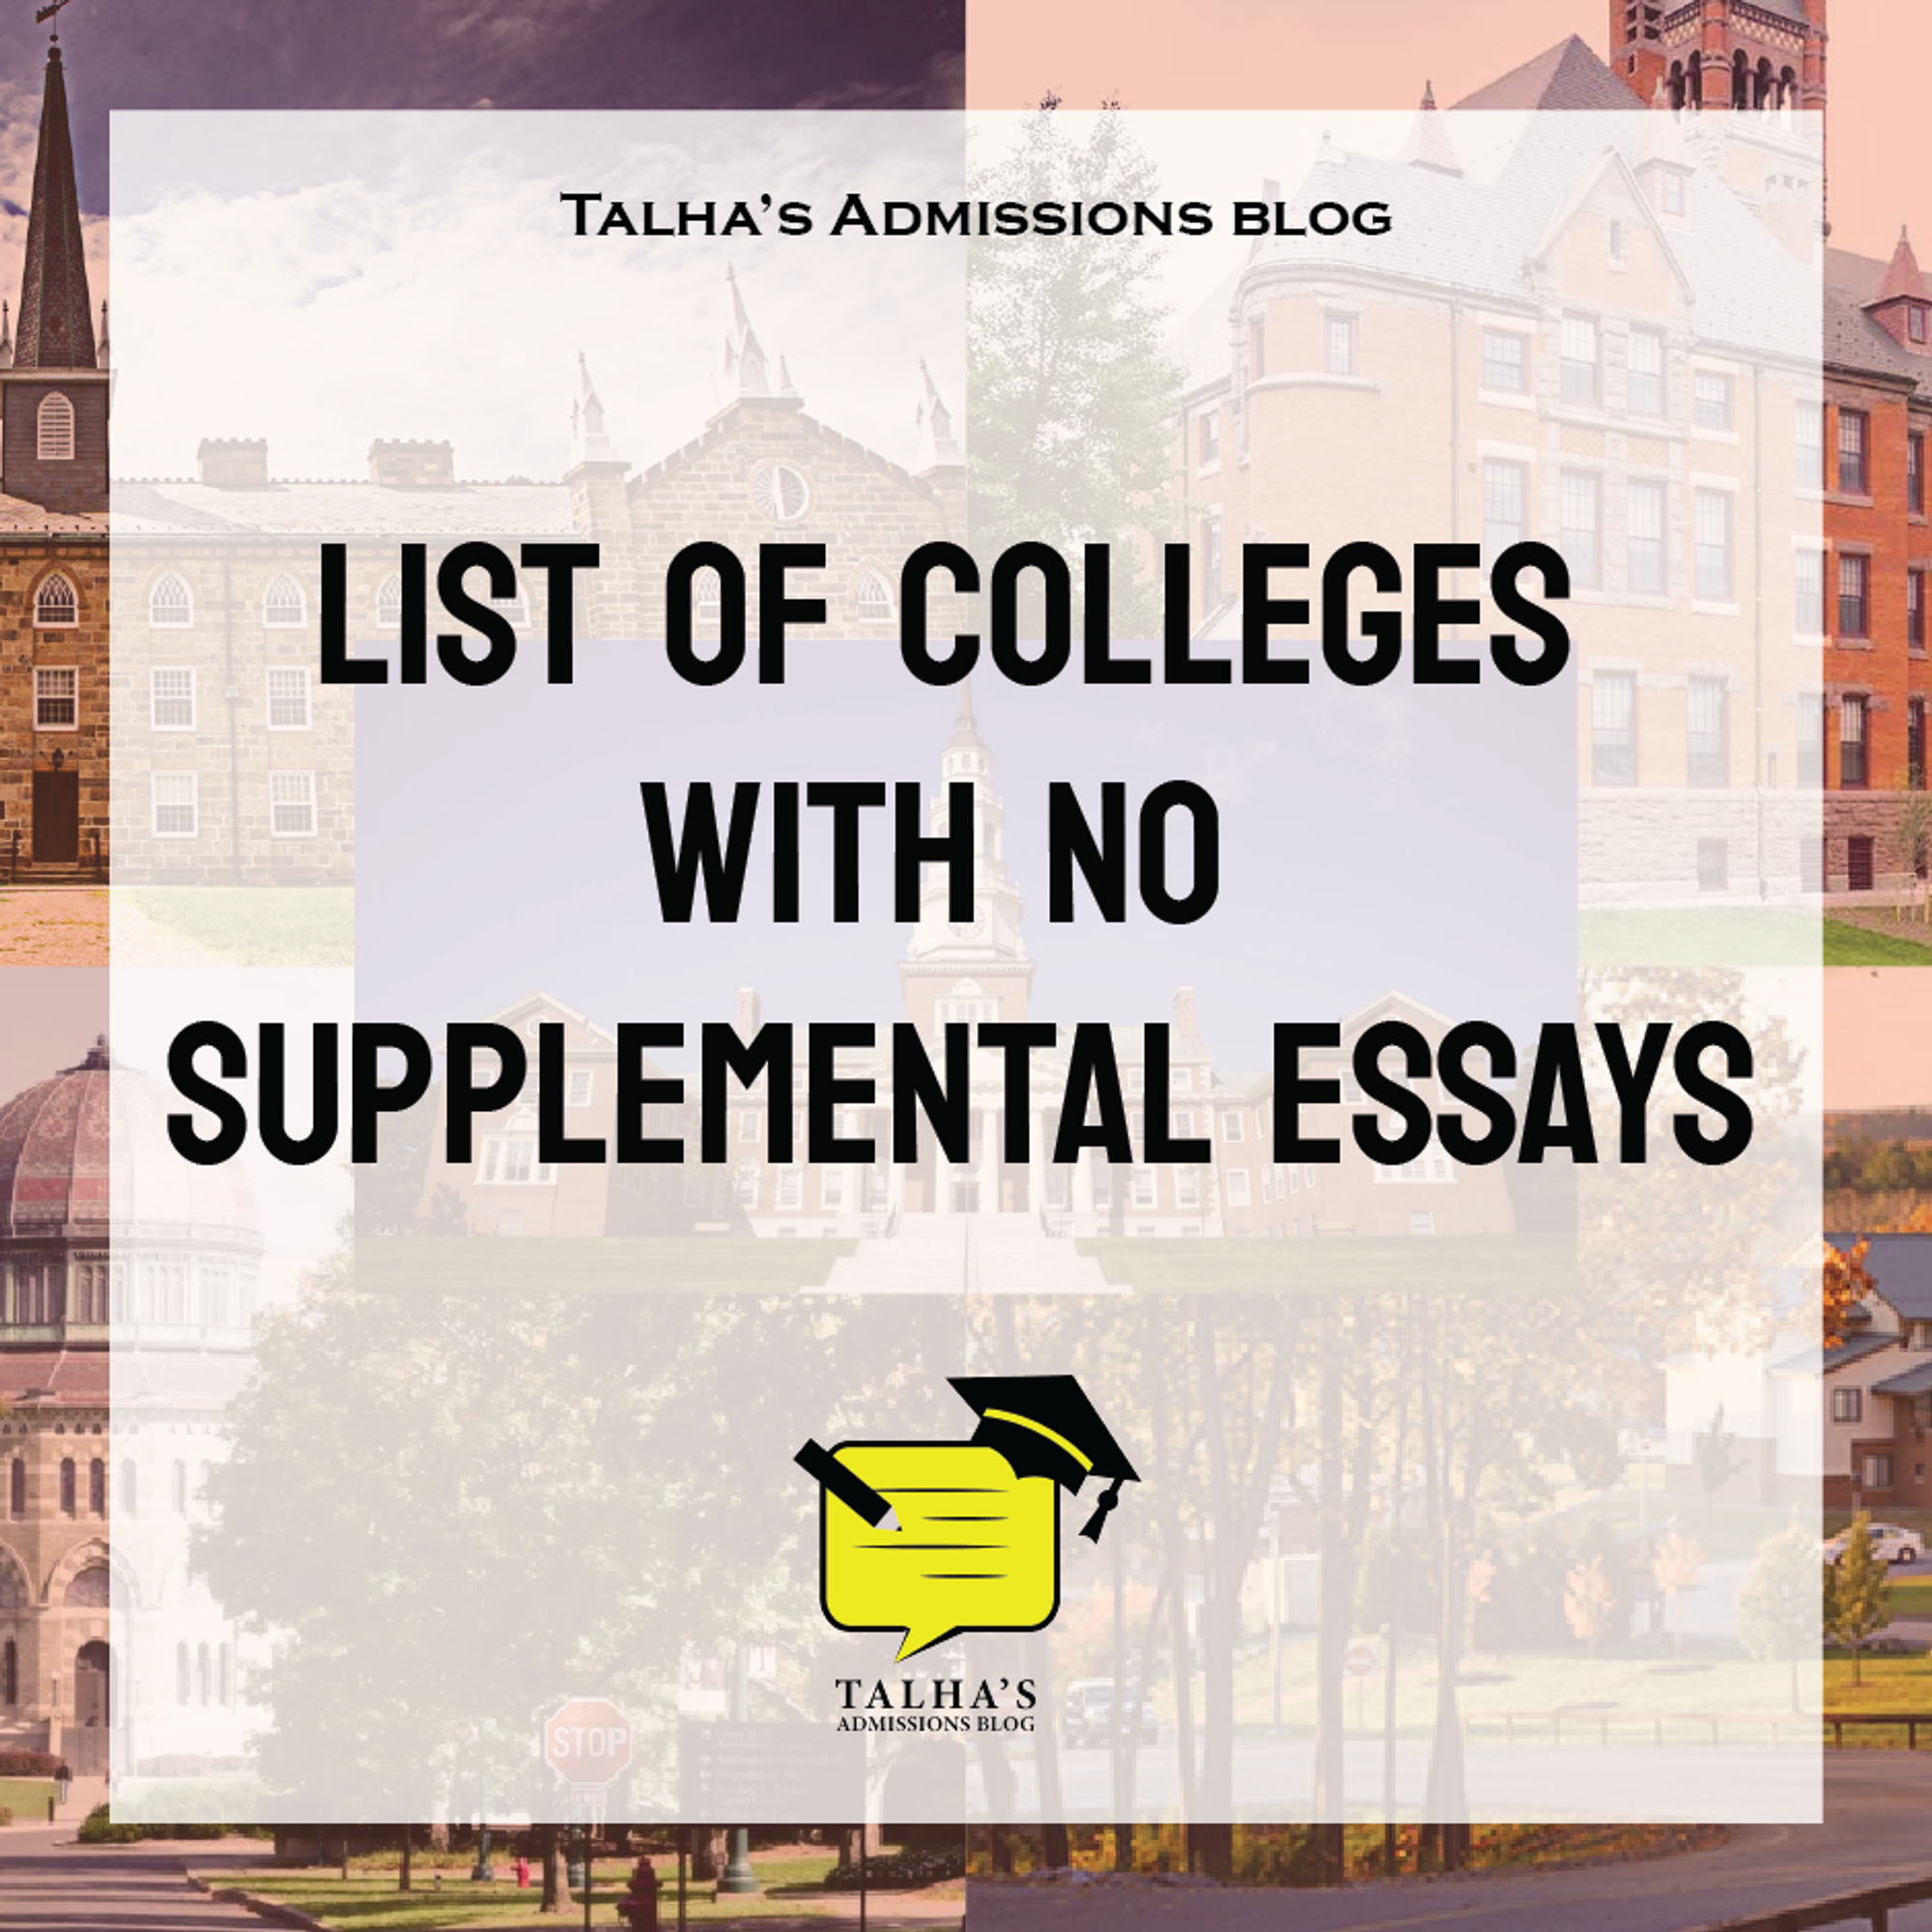 Complete List of Colleges with No Supplemental Essays